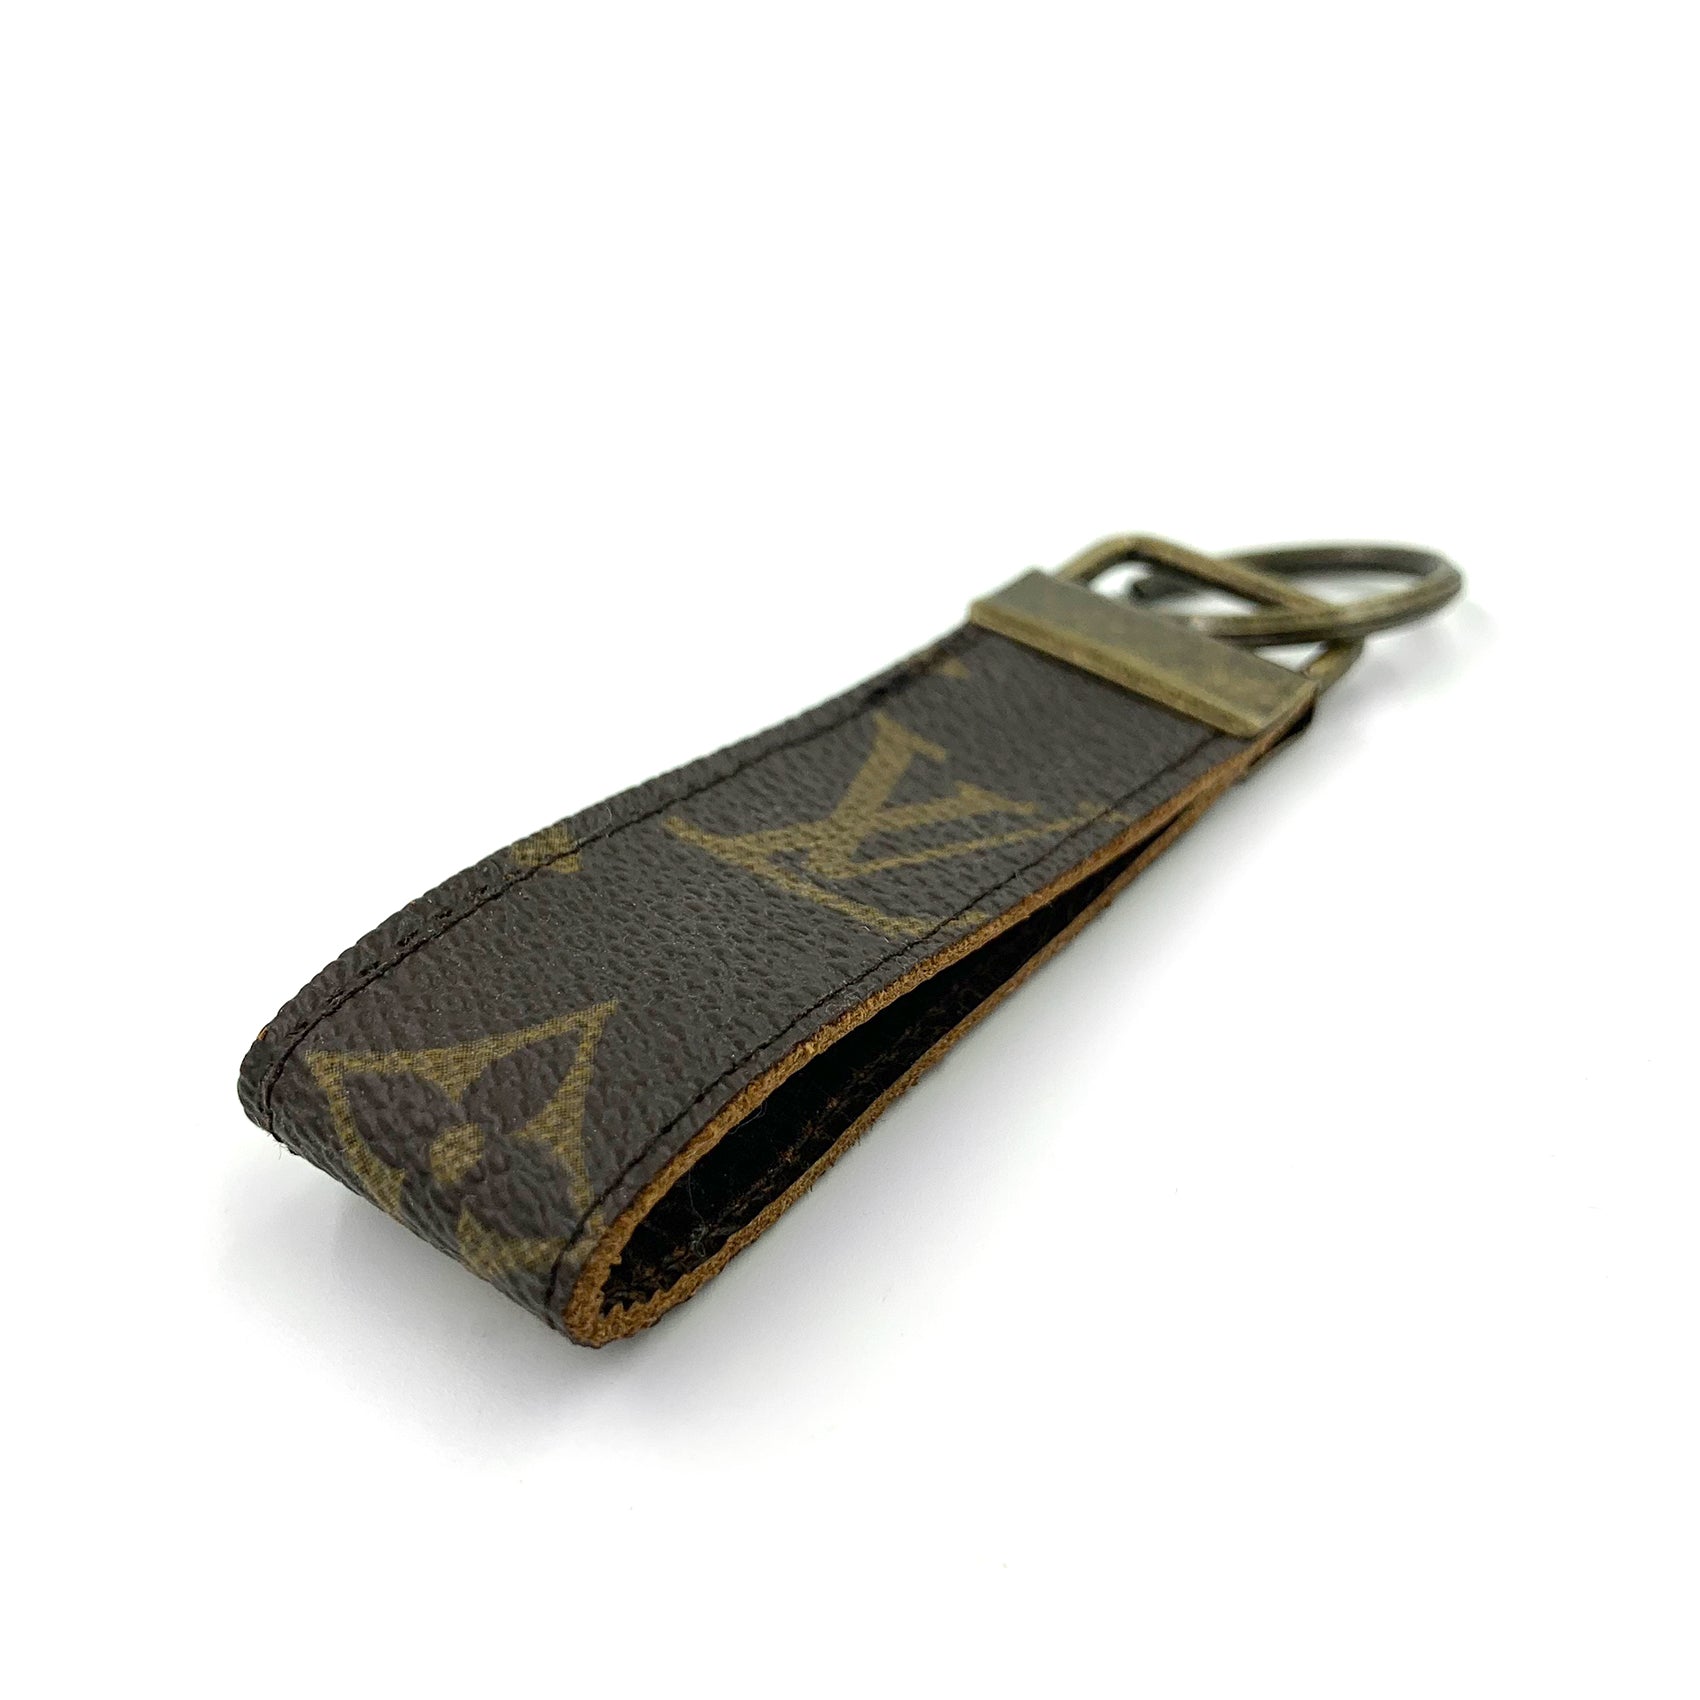 Upcycled Louis Vuitton Leather Key Chain V2 – N.Kluger Designs